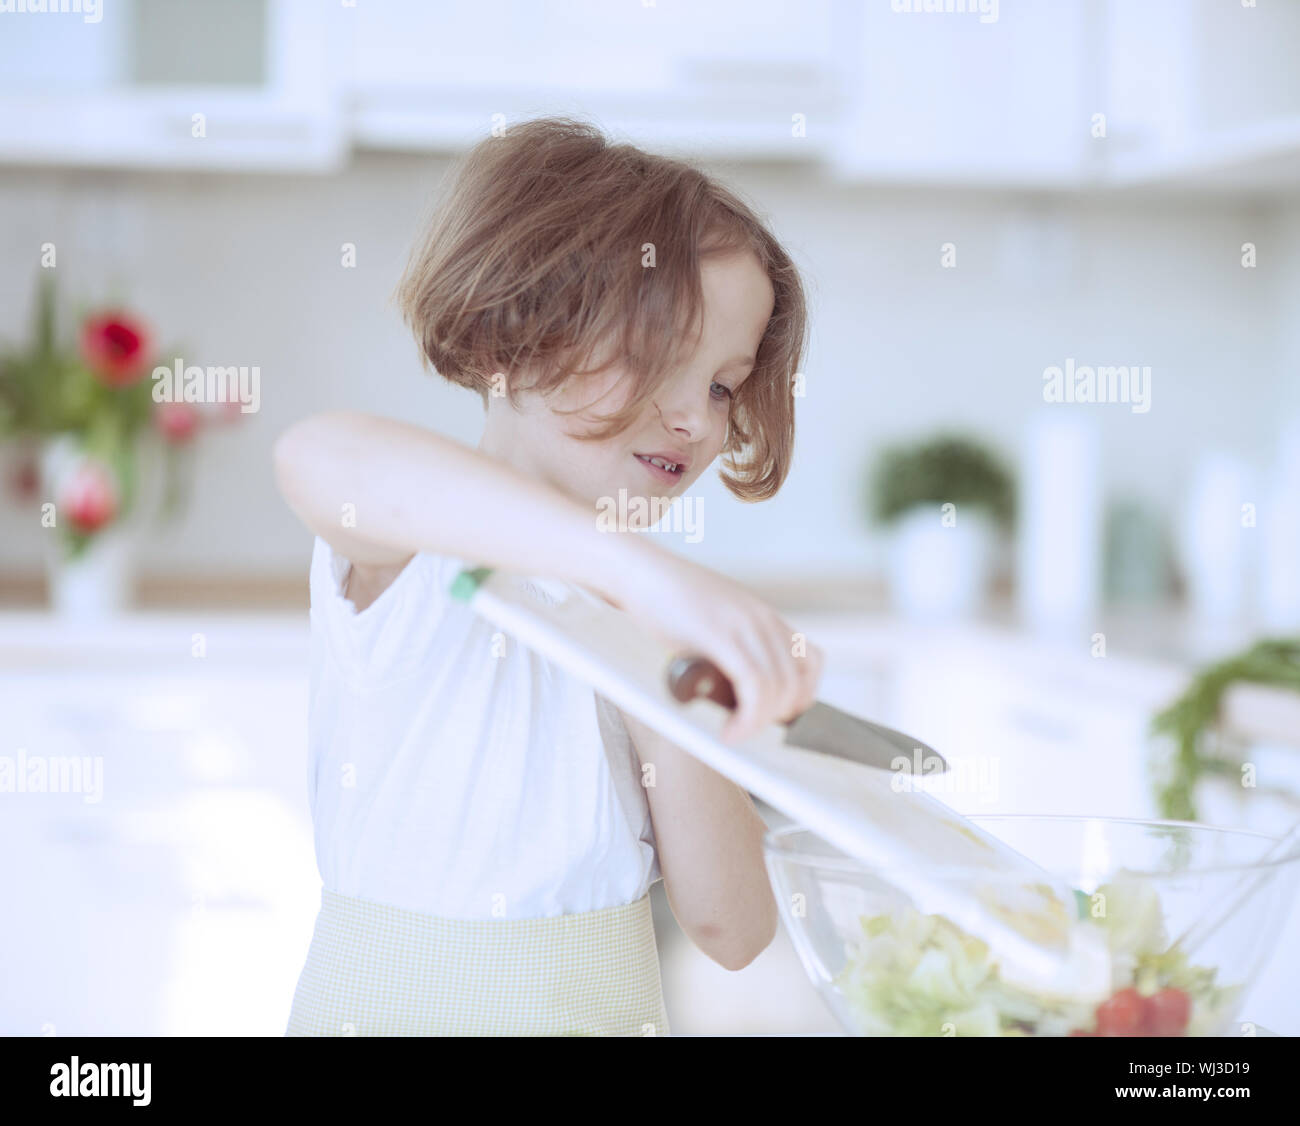 Young girl placing lettuce in salad bowl using a knife Stock Photo